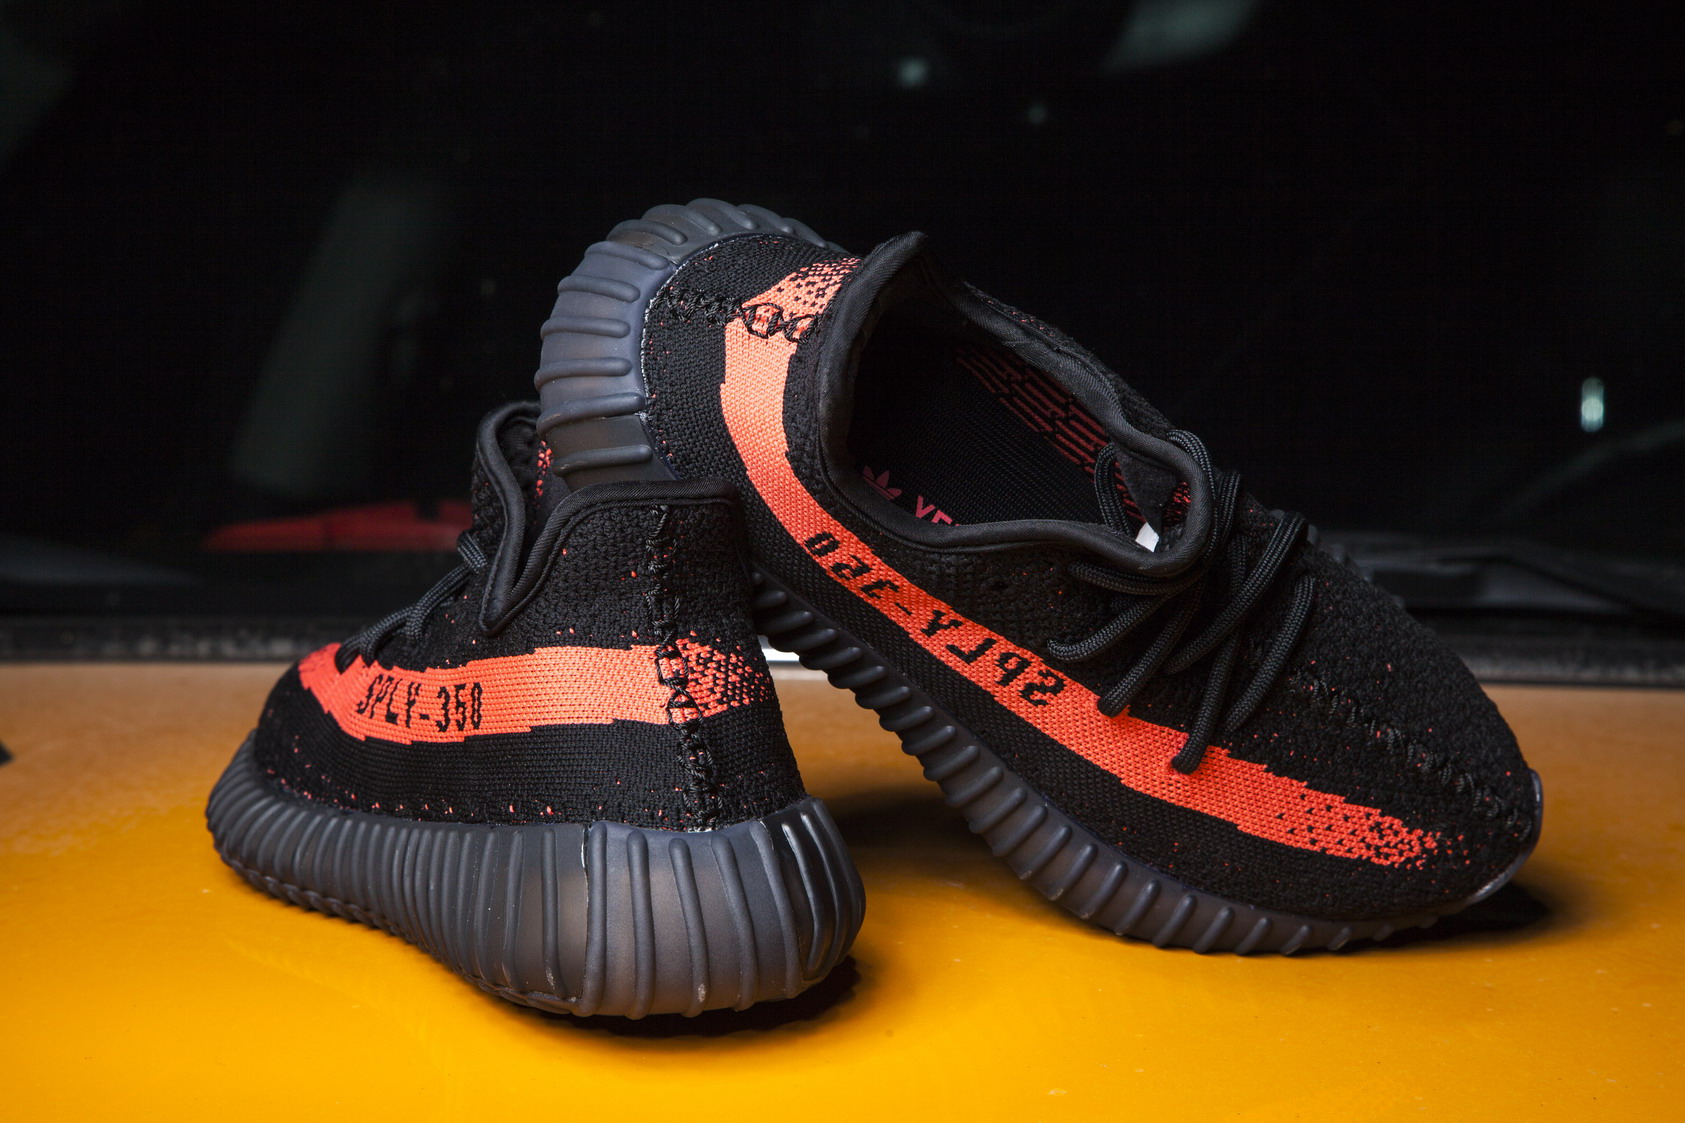 yeezy boost 350 infrared